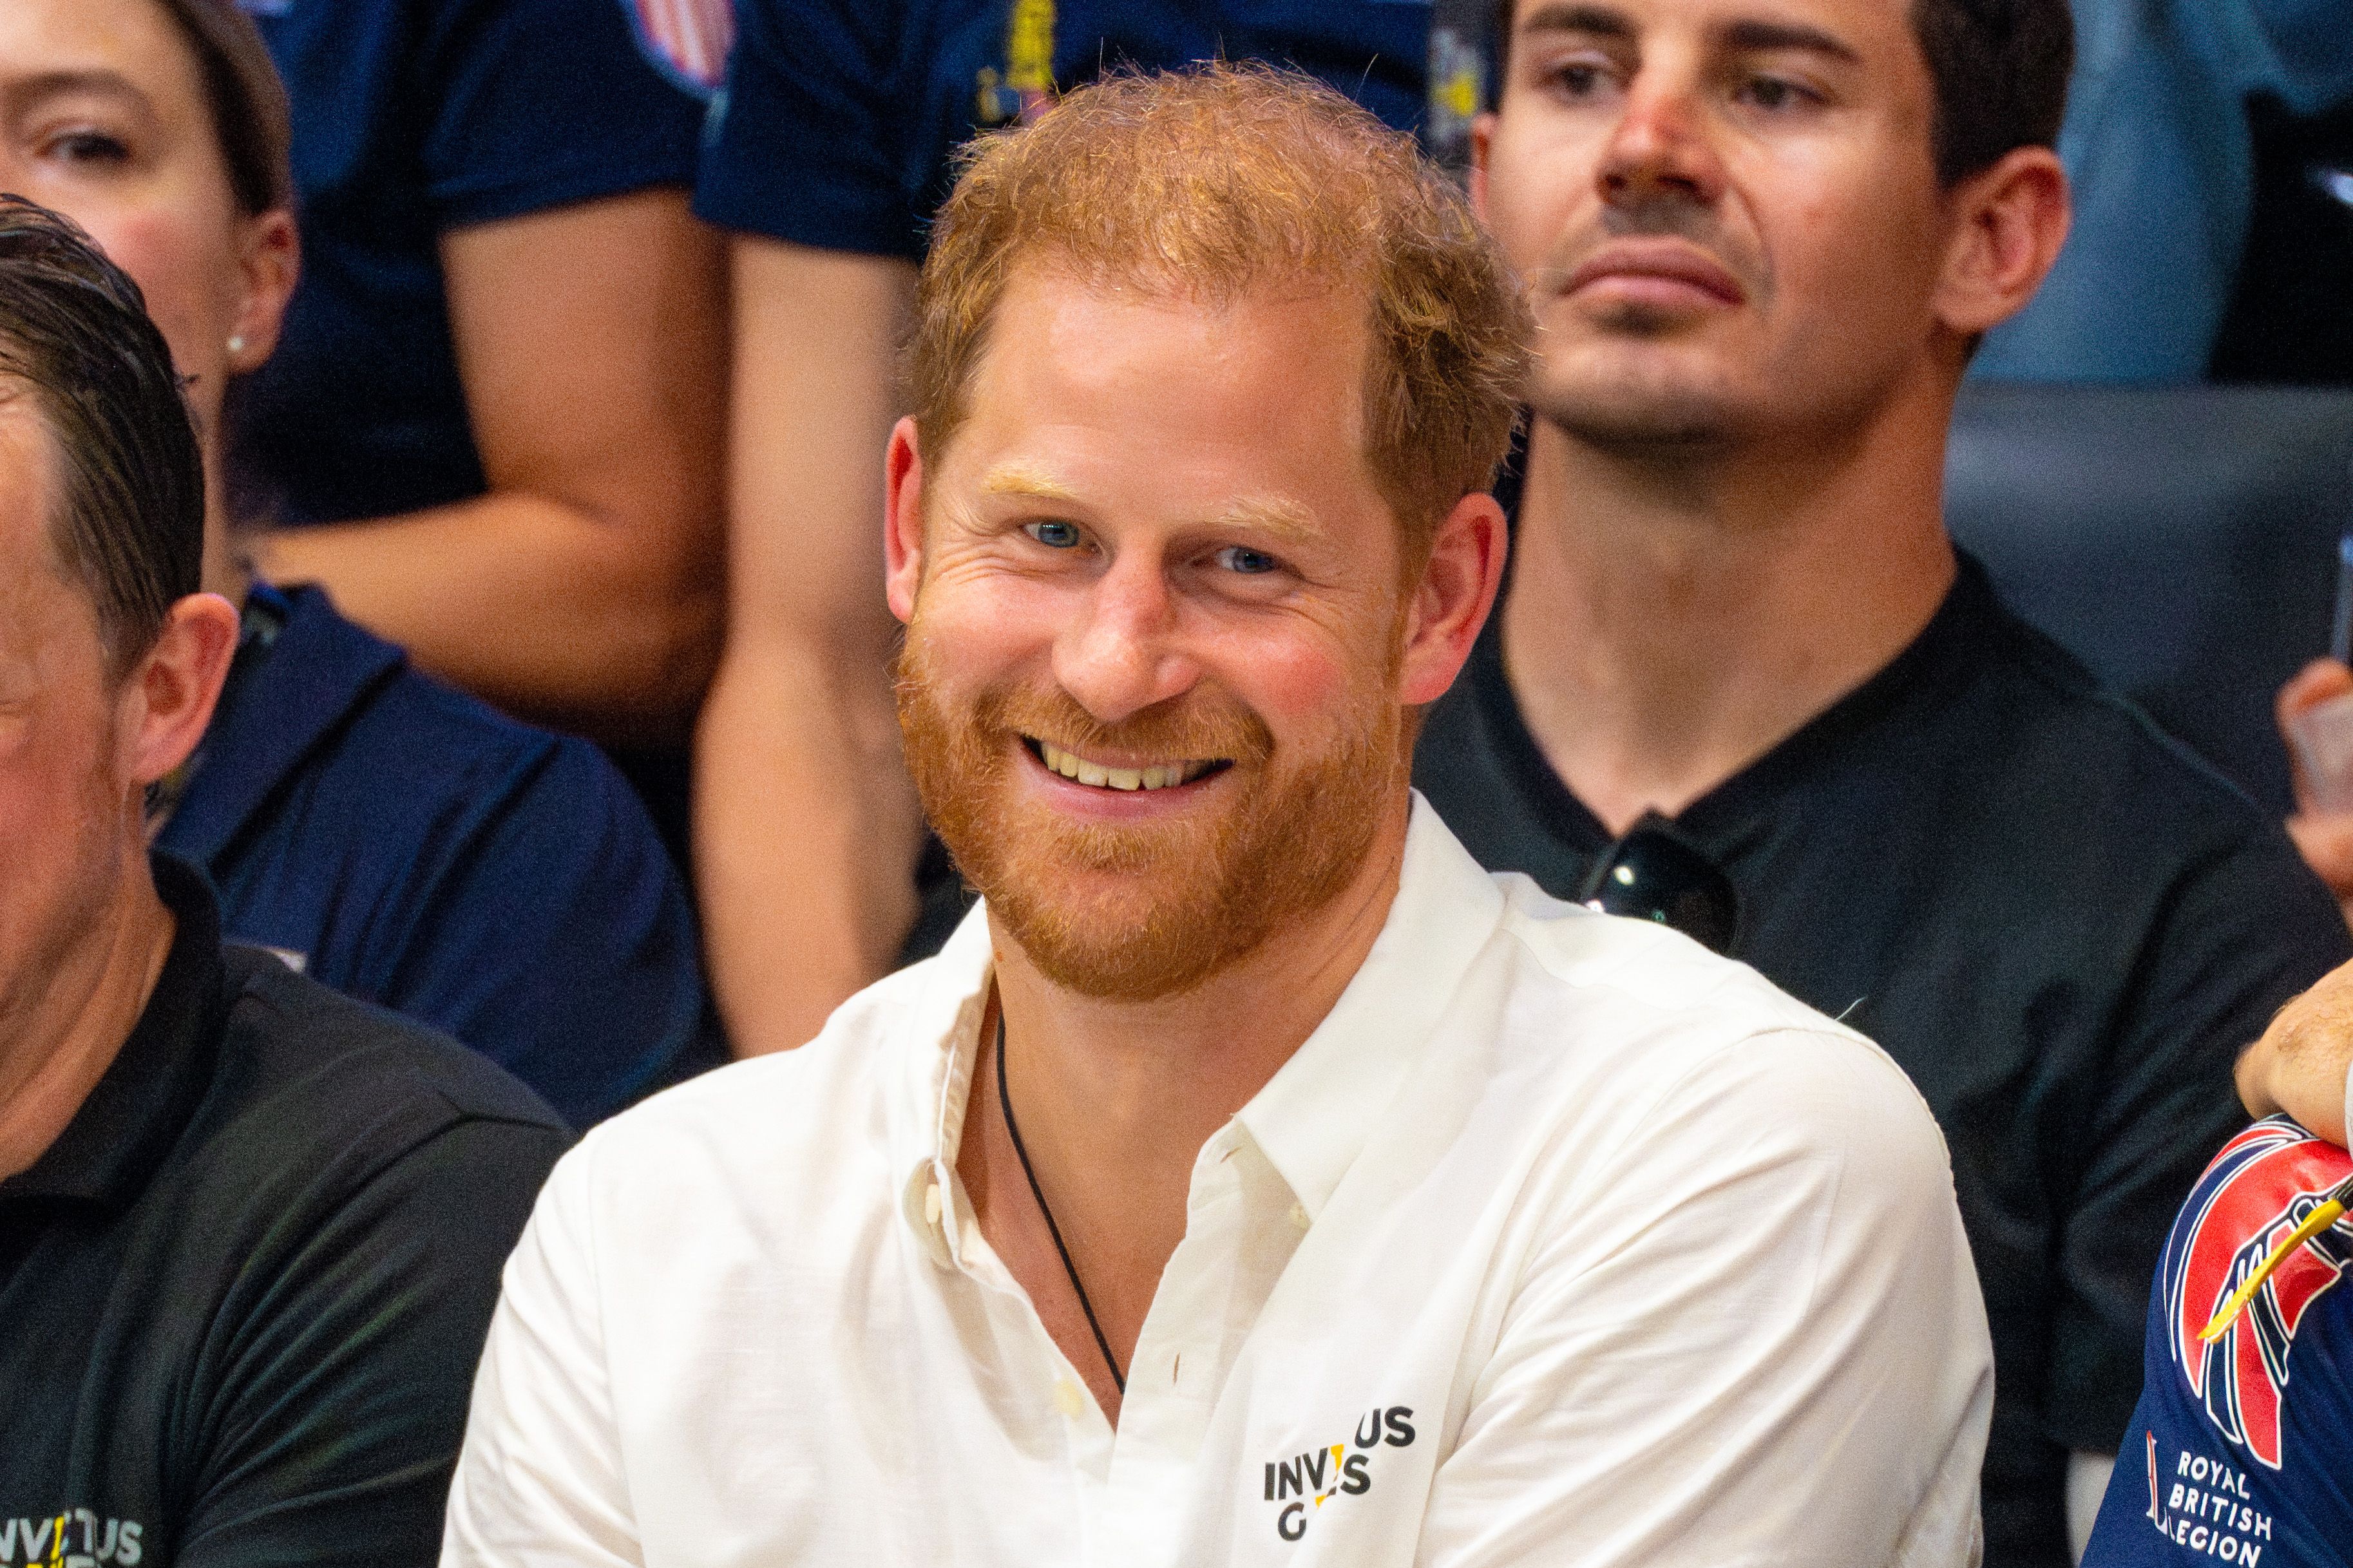 <p>Fifth in the royal line of succession is Prince Henry of Wales, better known as Prince Harry, the Duke of Sussex. Though Harry and wife Duchess Meghan, whom he <a href="https://www.wonderwall.com/celebrity/photos/prince-harry-meghan-markle-married-royal-wedding-england-all-best-photos-3014346.gallery">married</a> in 2018, exited as senior working members of the royal family in 2020, he remains in the line of succession, as do his children...</p>